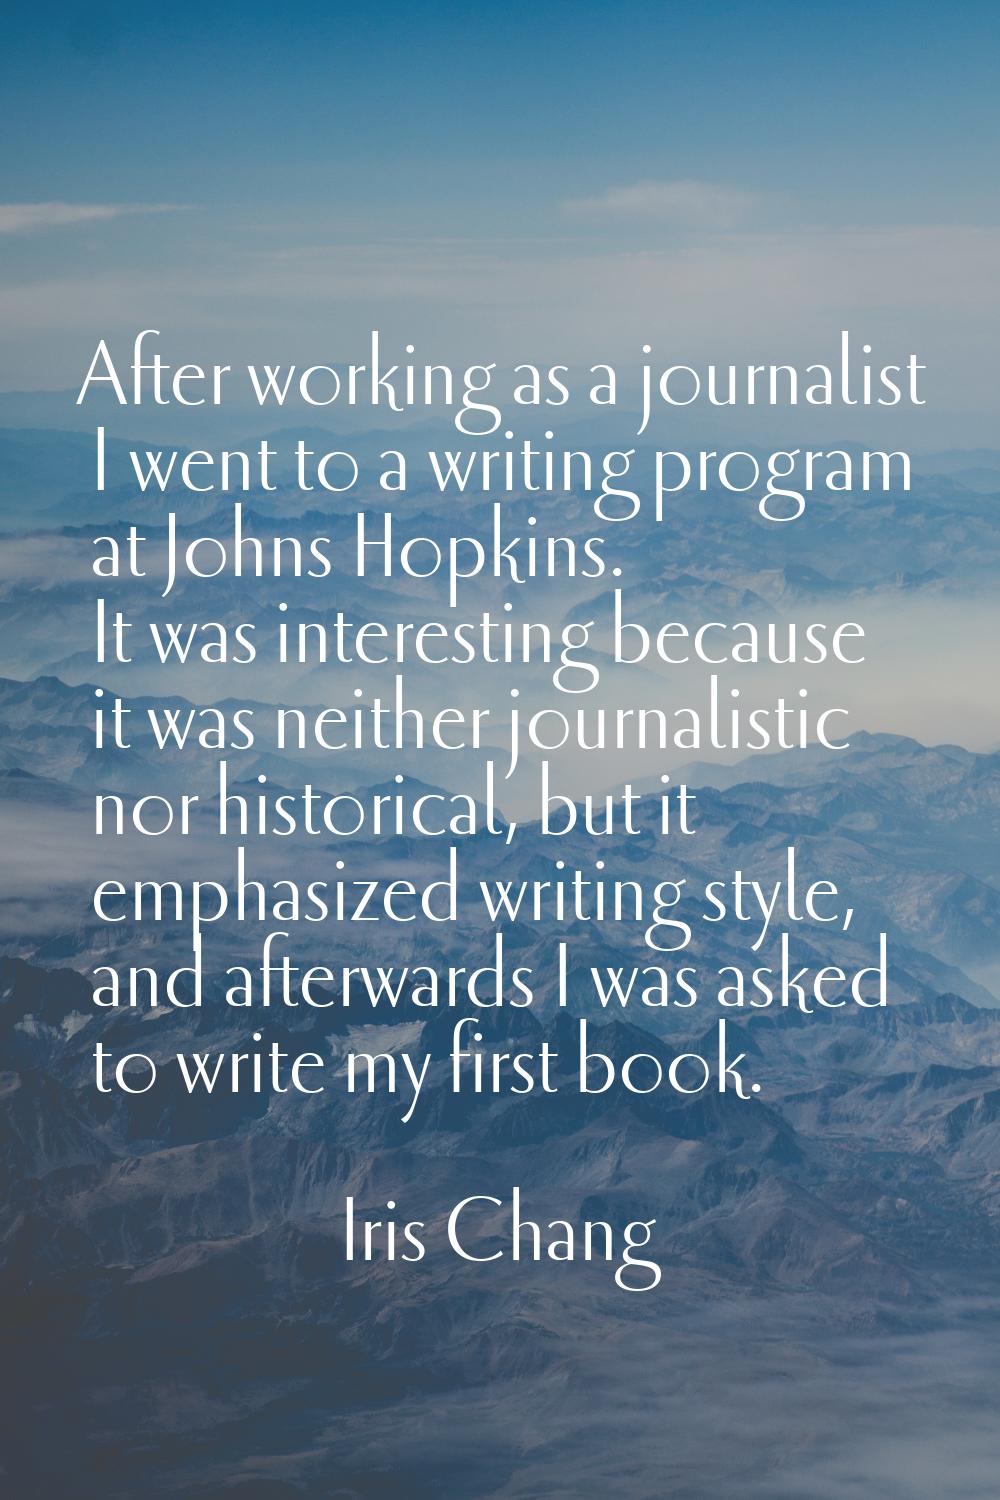 After working as a journalist I went to a writing program at Johns Hopkins. It was interesting beca